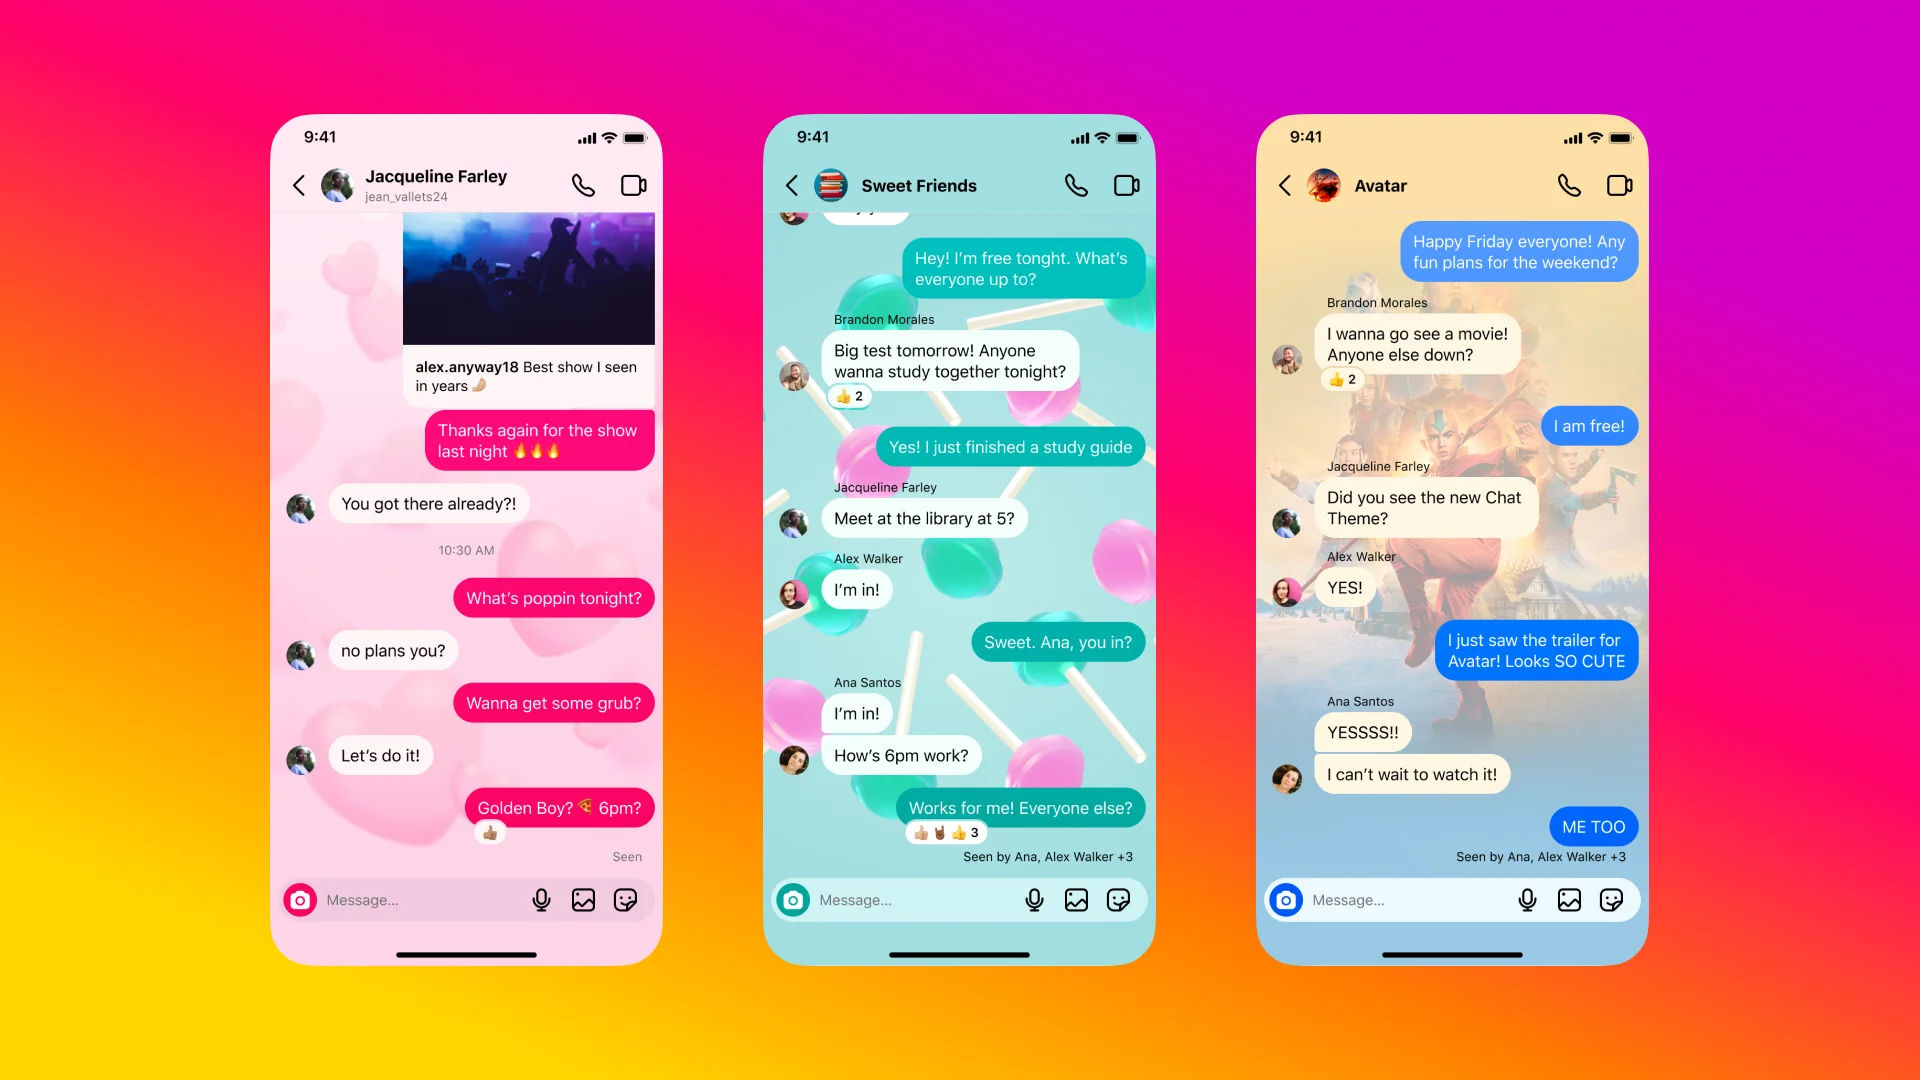 Instagram now lets users apply themes to their chats.